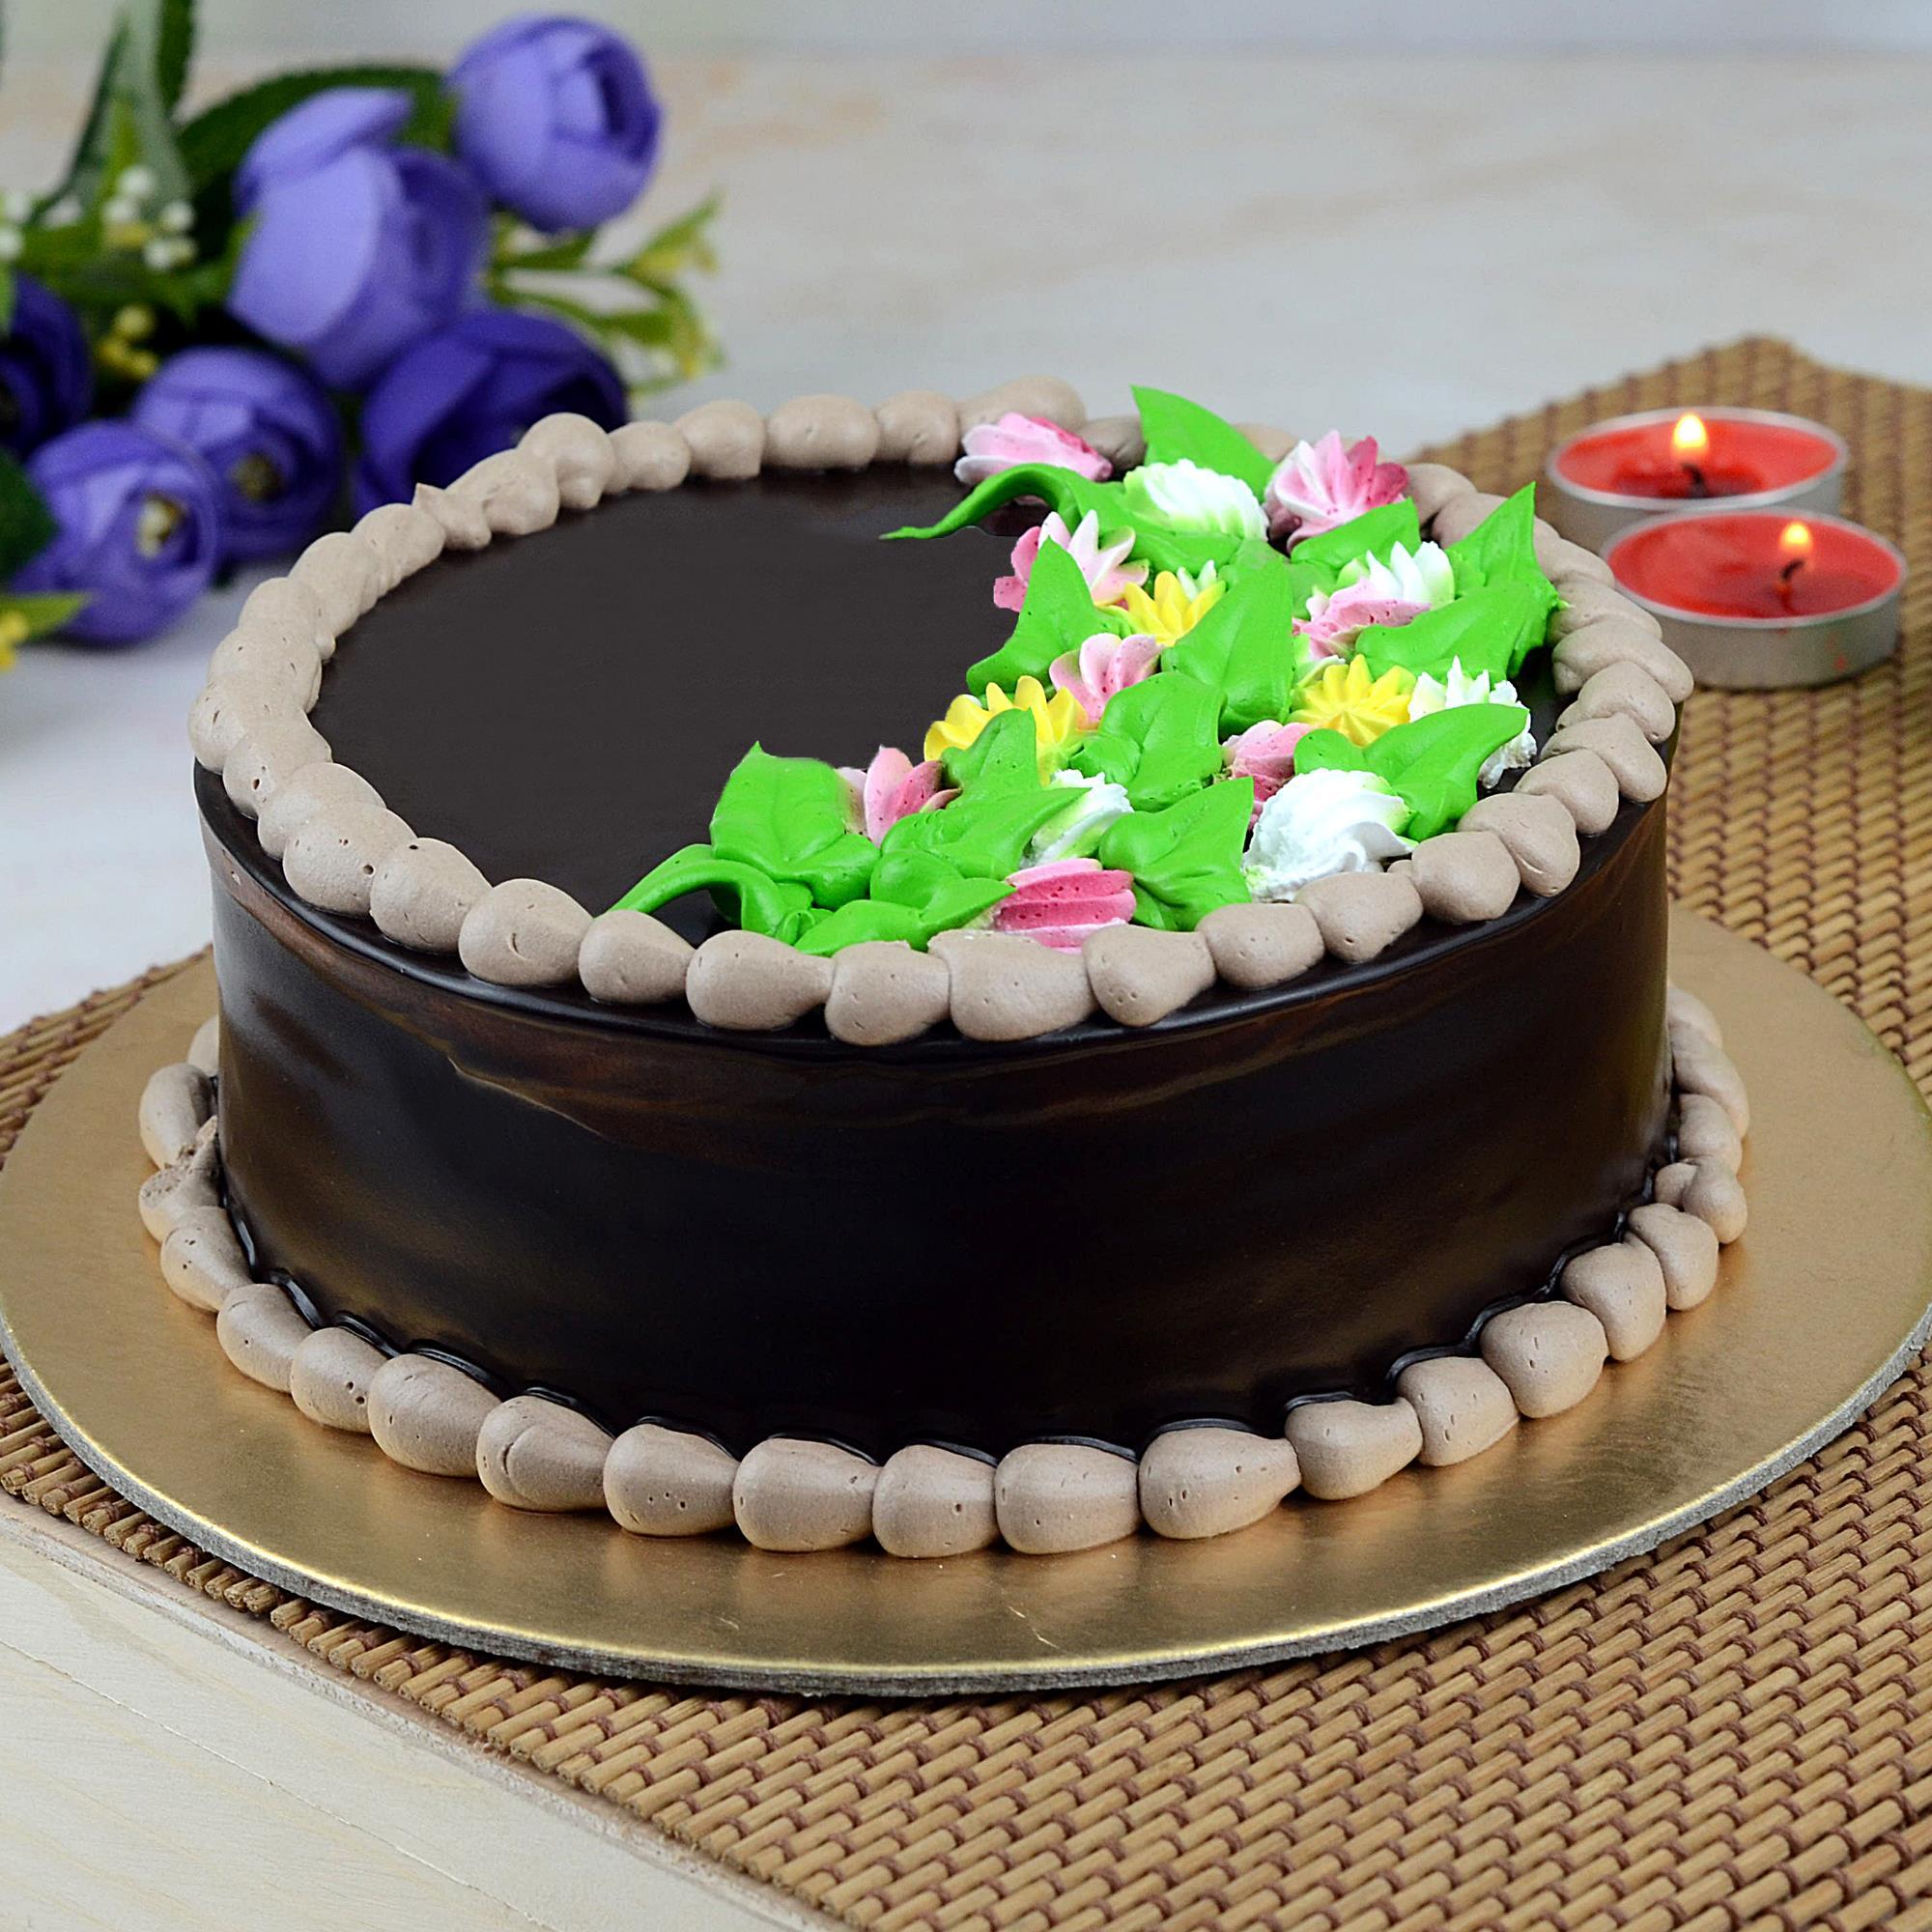 Online Cake Delivery in Ahmedabad | Midnight cake delivery in Ahmedabad -  Giftalove